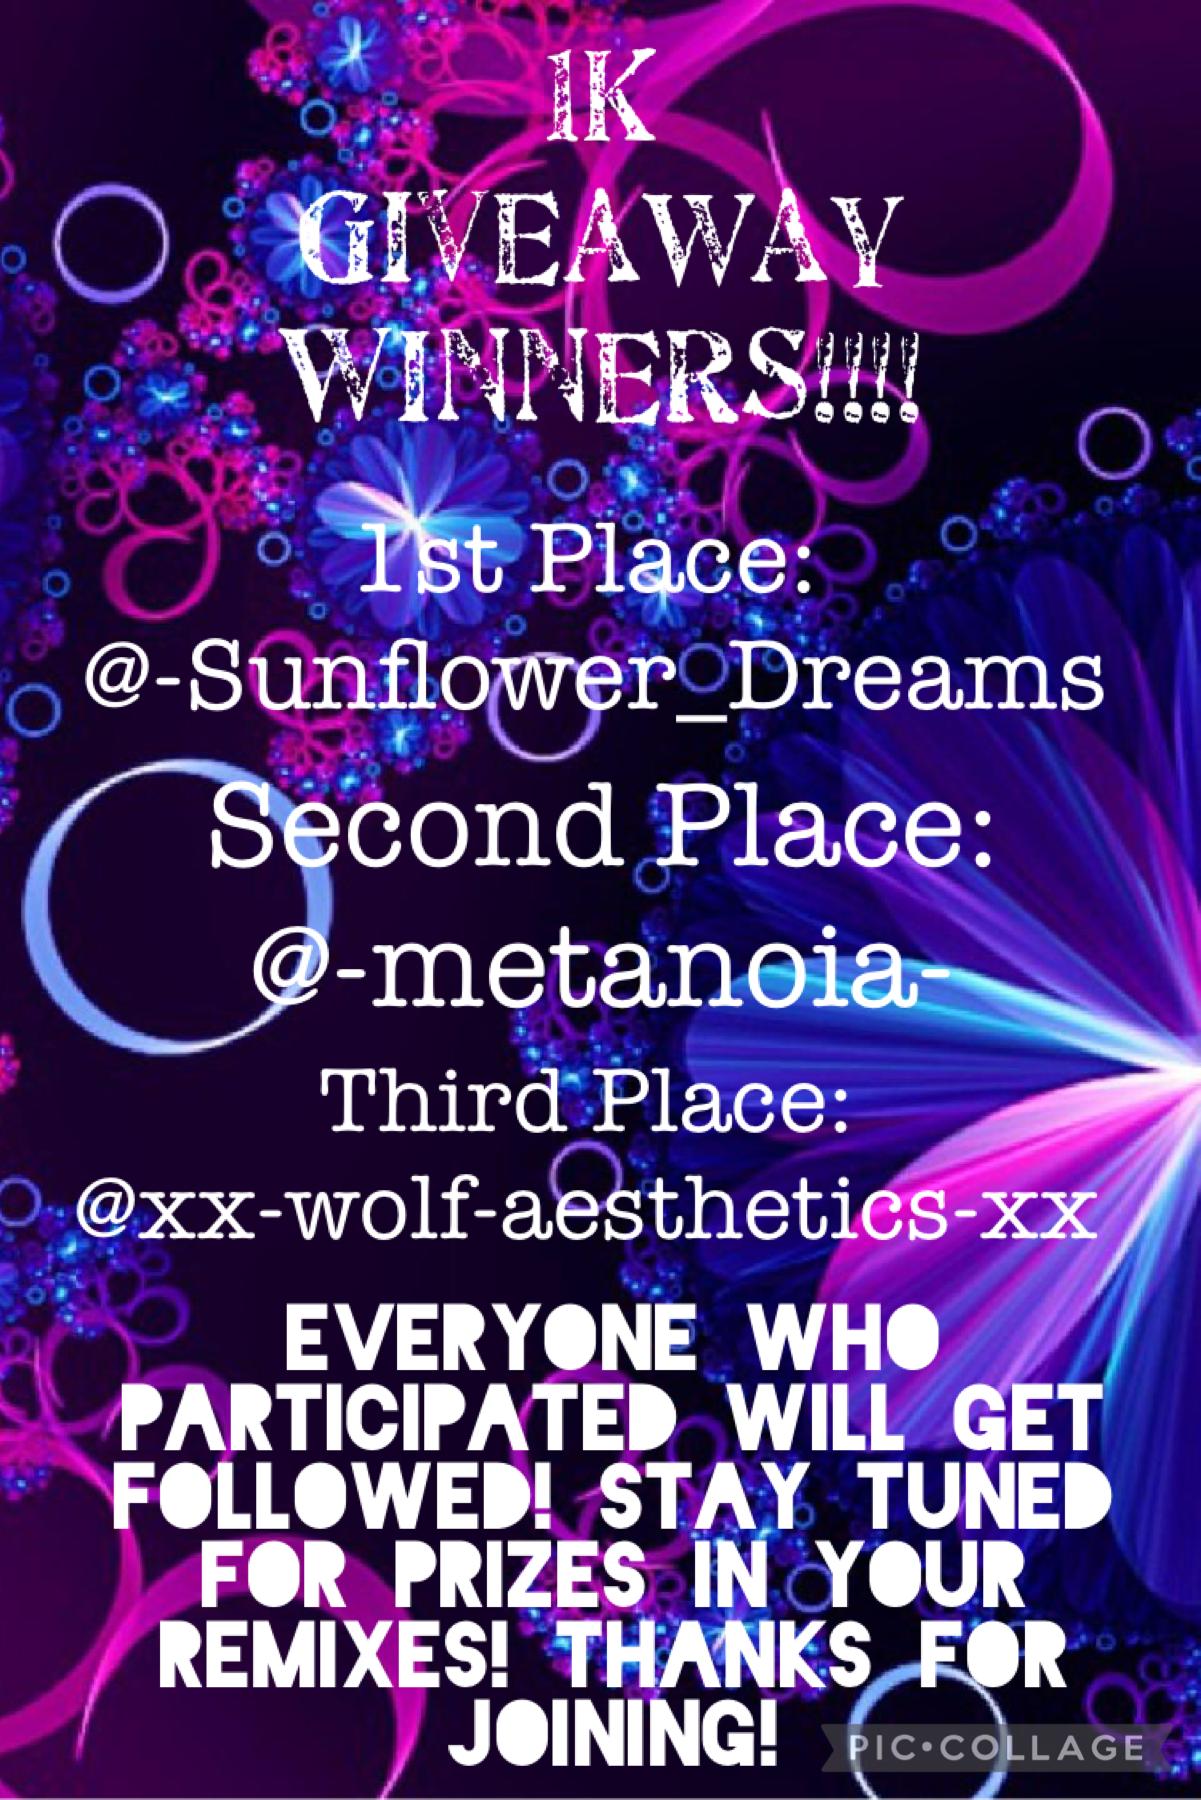 🥳TAP🥳
Congratulations to everyone that won! Your prizes will be posted here or in your remixes so be watching! Thanks for everyone that joined and I will follow you all on both accounts! Make sure to join my collage contest for more great prizes! xoxo -La